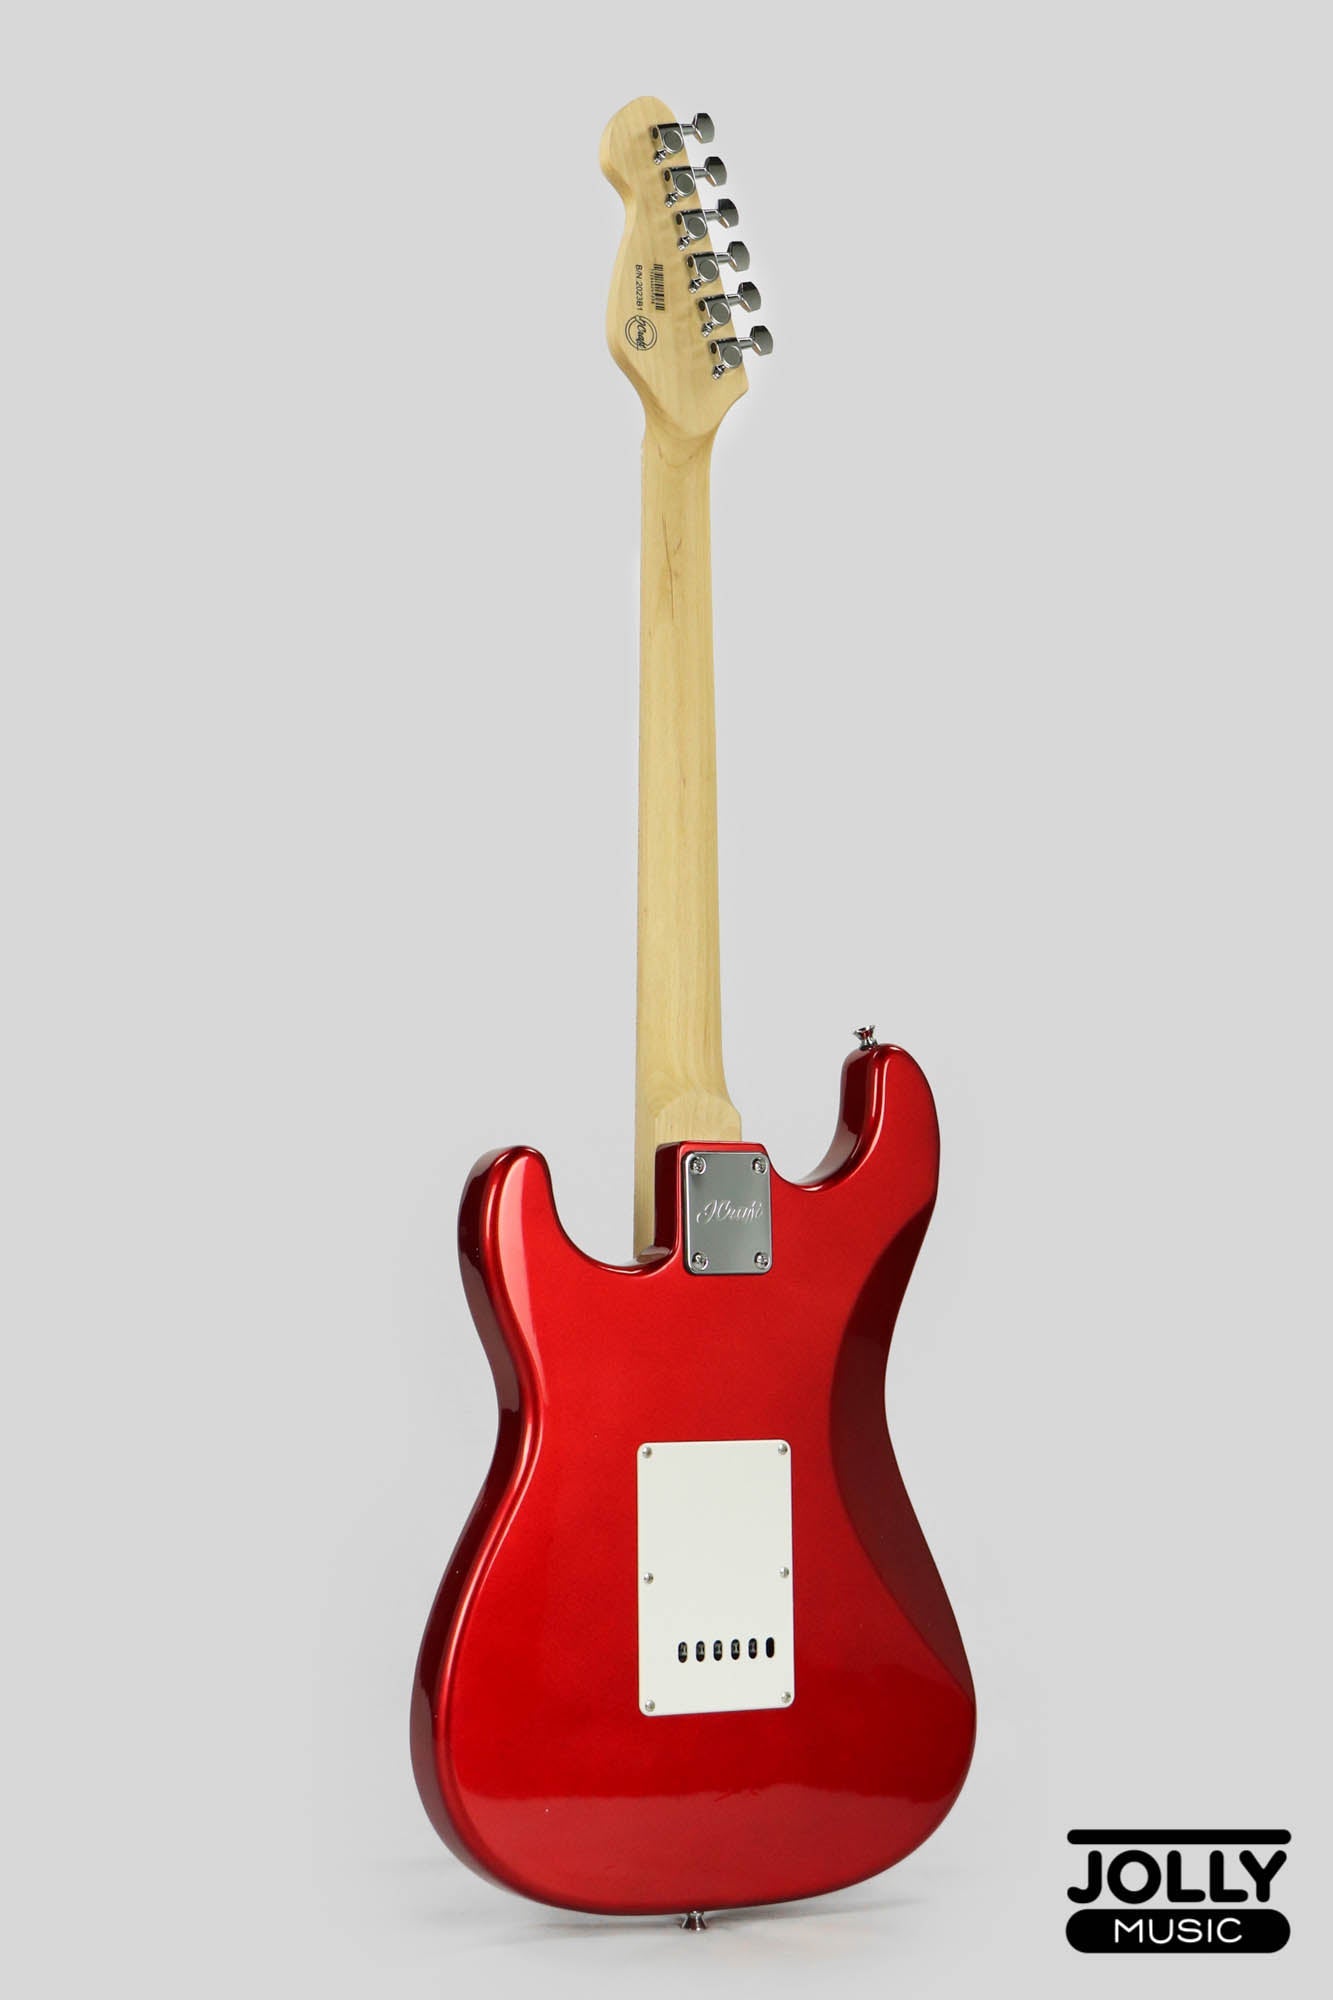 JCraft S-1H HSS Electric Guitar with Gigbag - Candy Apple Red